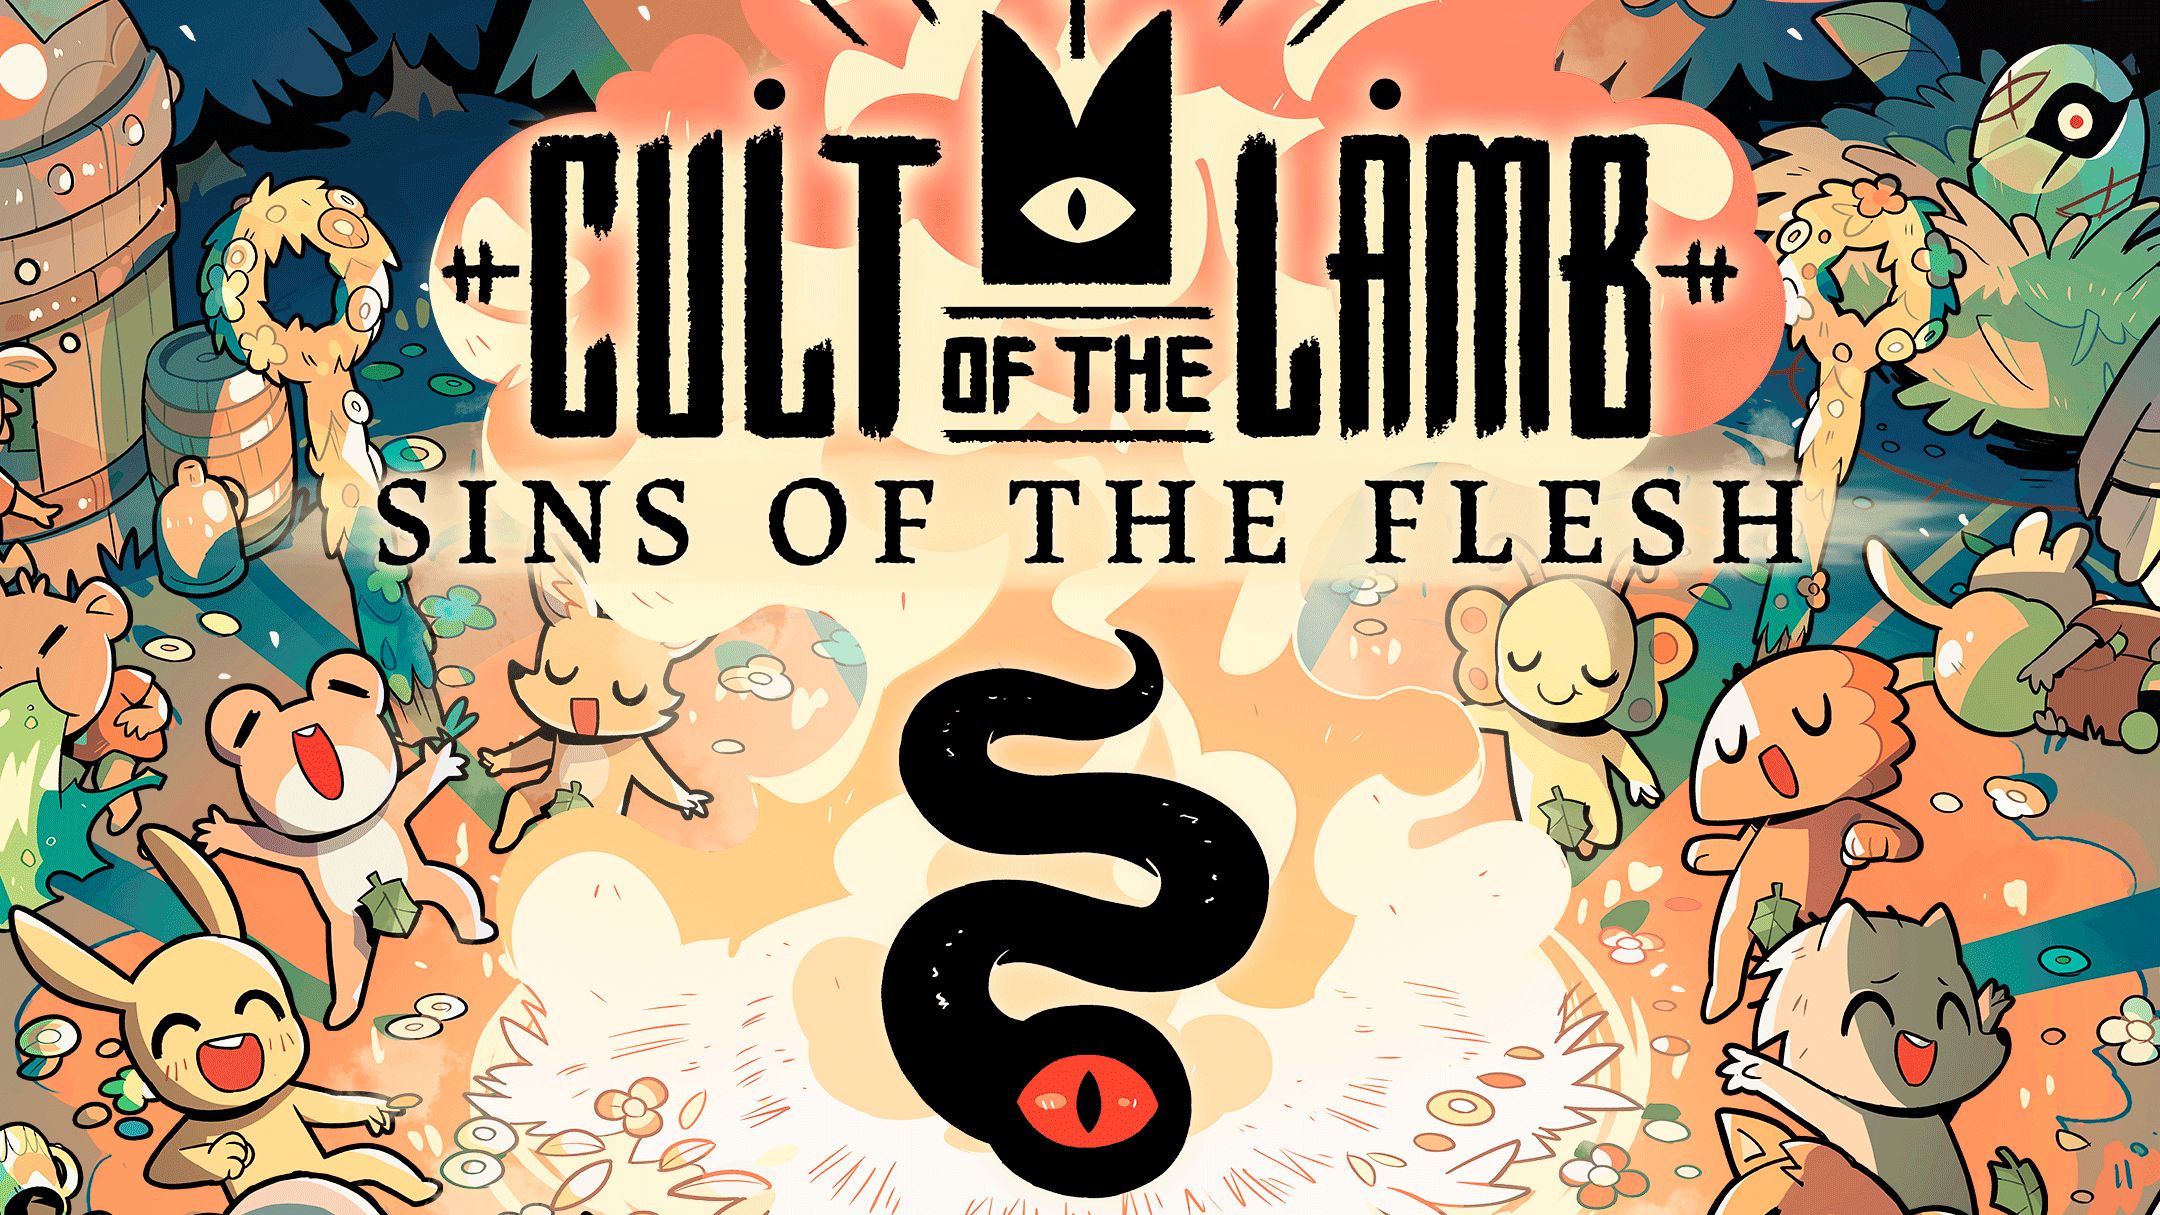 Cult Of The Lamb': How To Unlock More Weapons And Upgrades